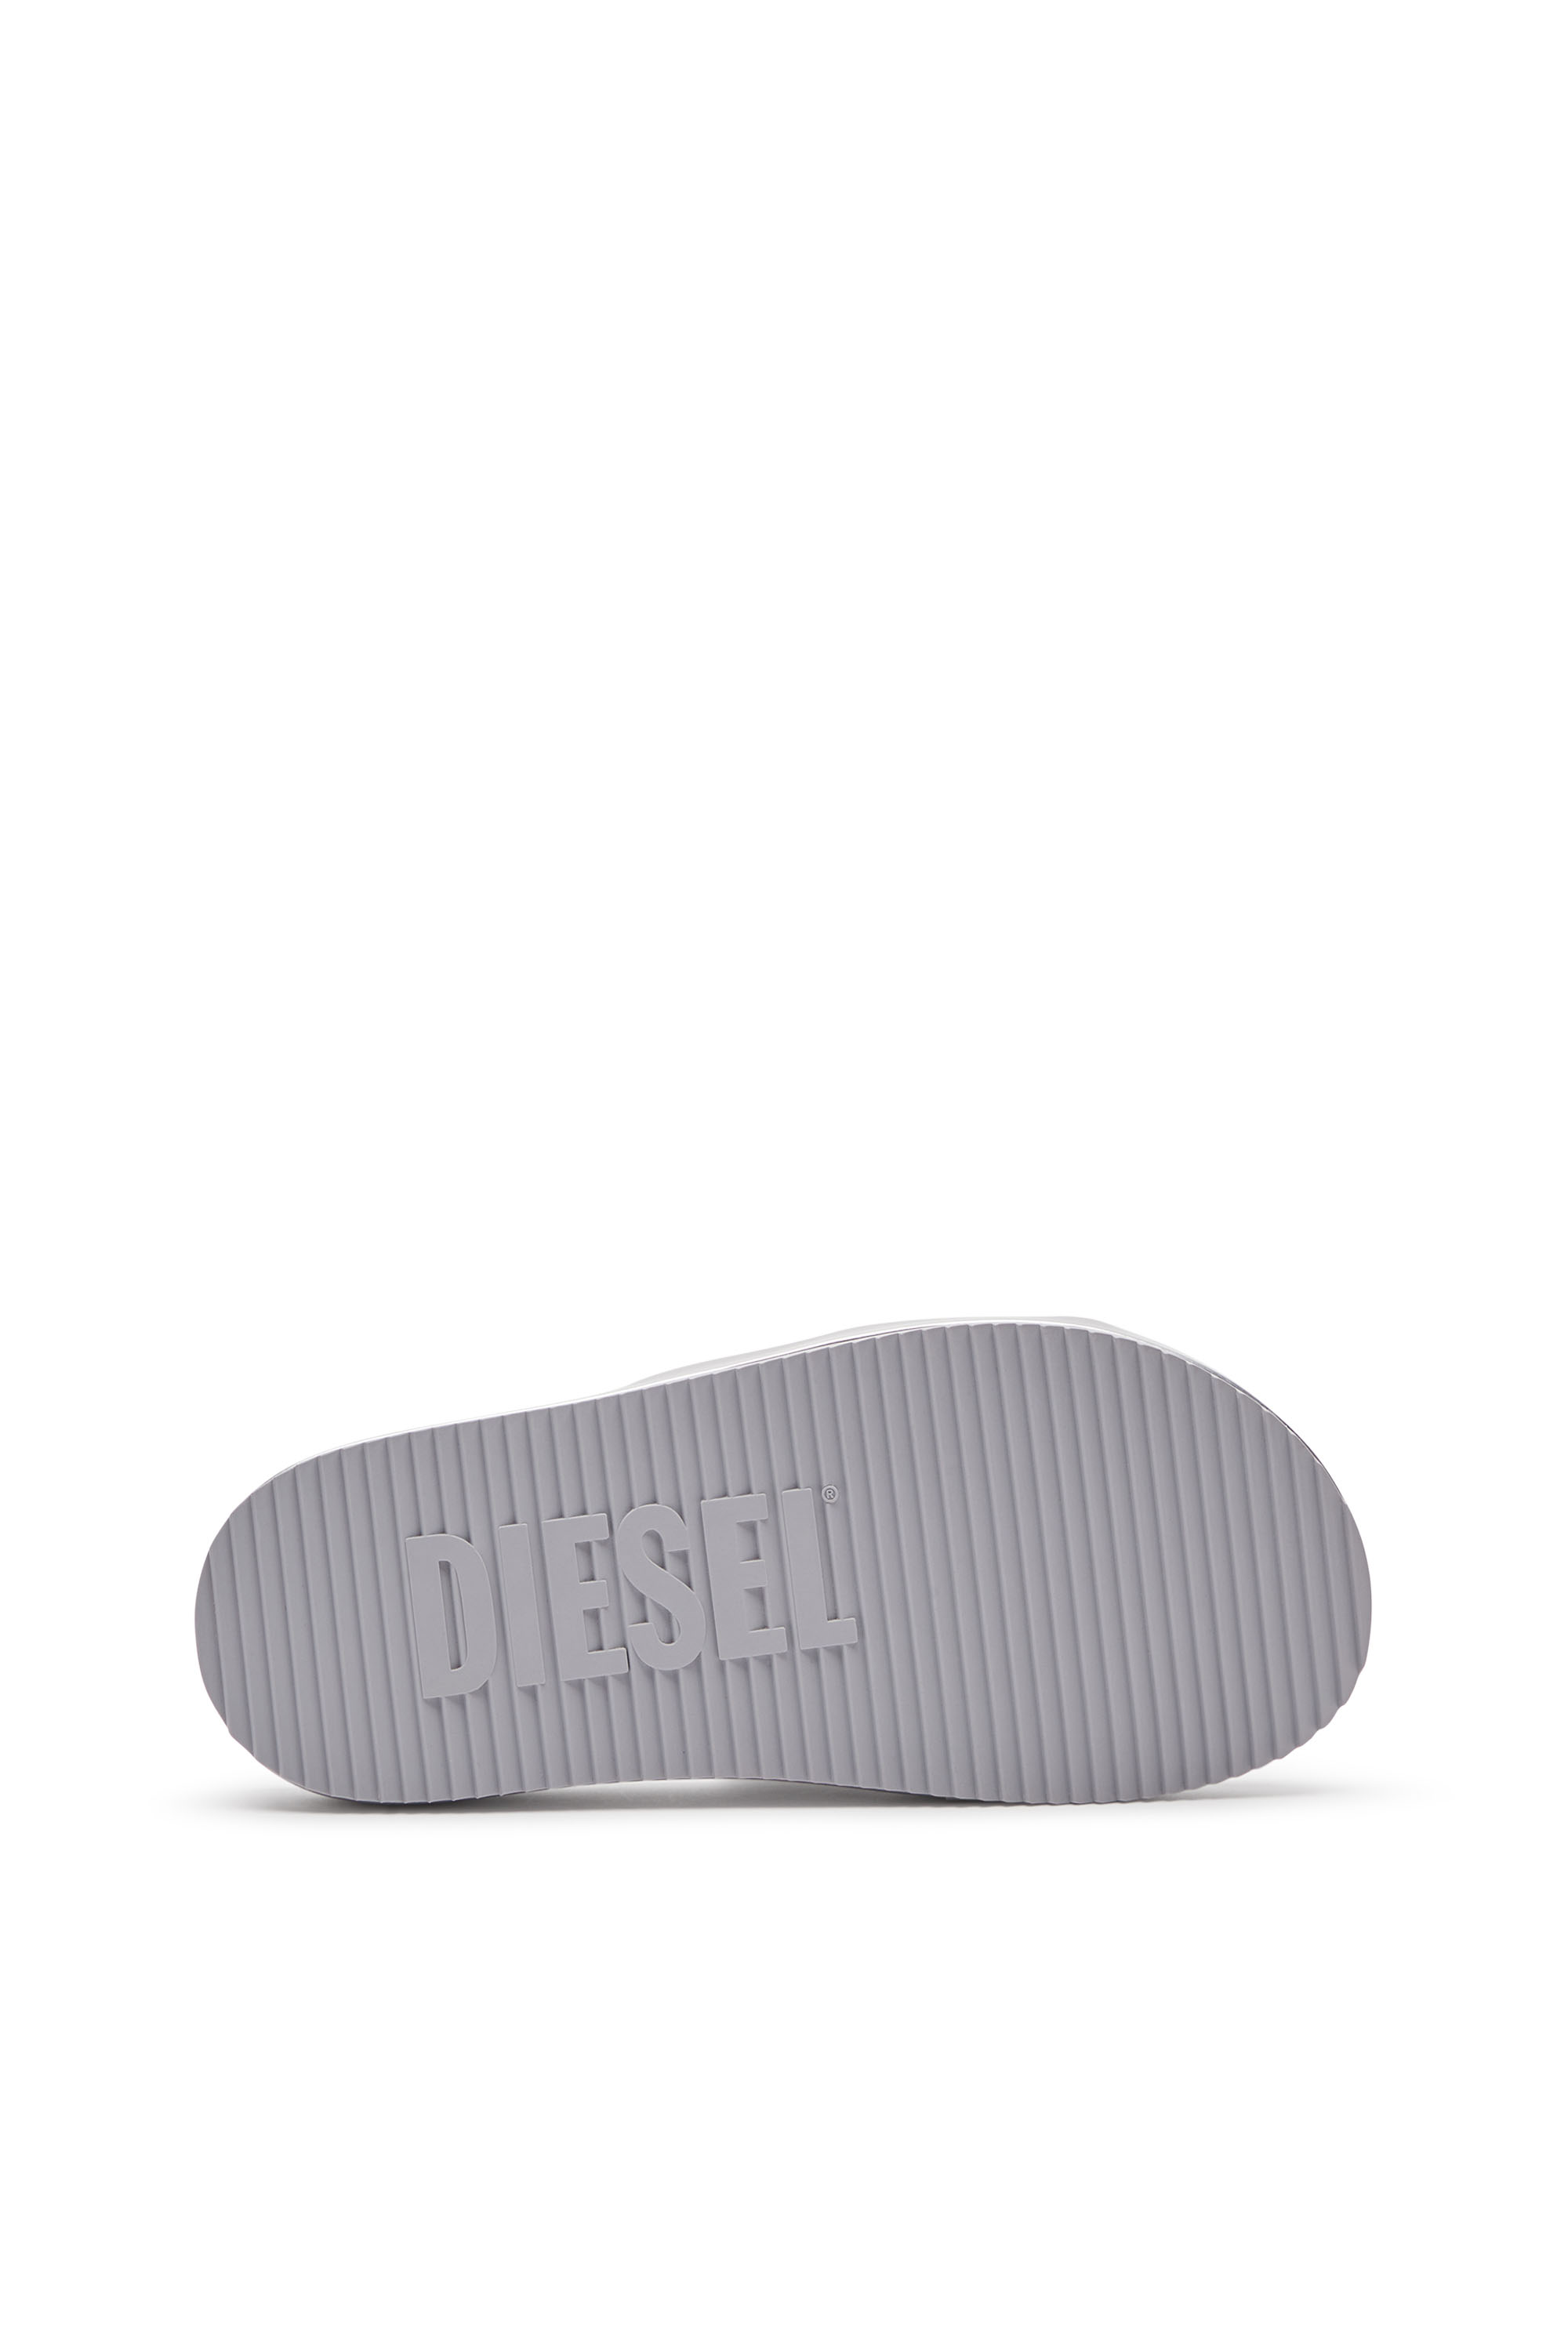 Diesel - SA-SLIDE D OVAL W, Woman Sa-Slide D-Metallic slide sandals with Oval D strap in Silver - Image 4